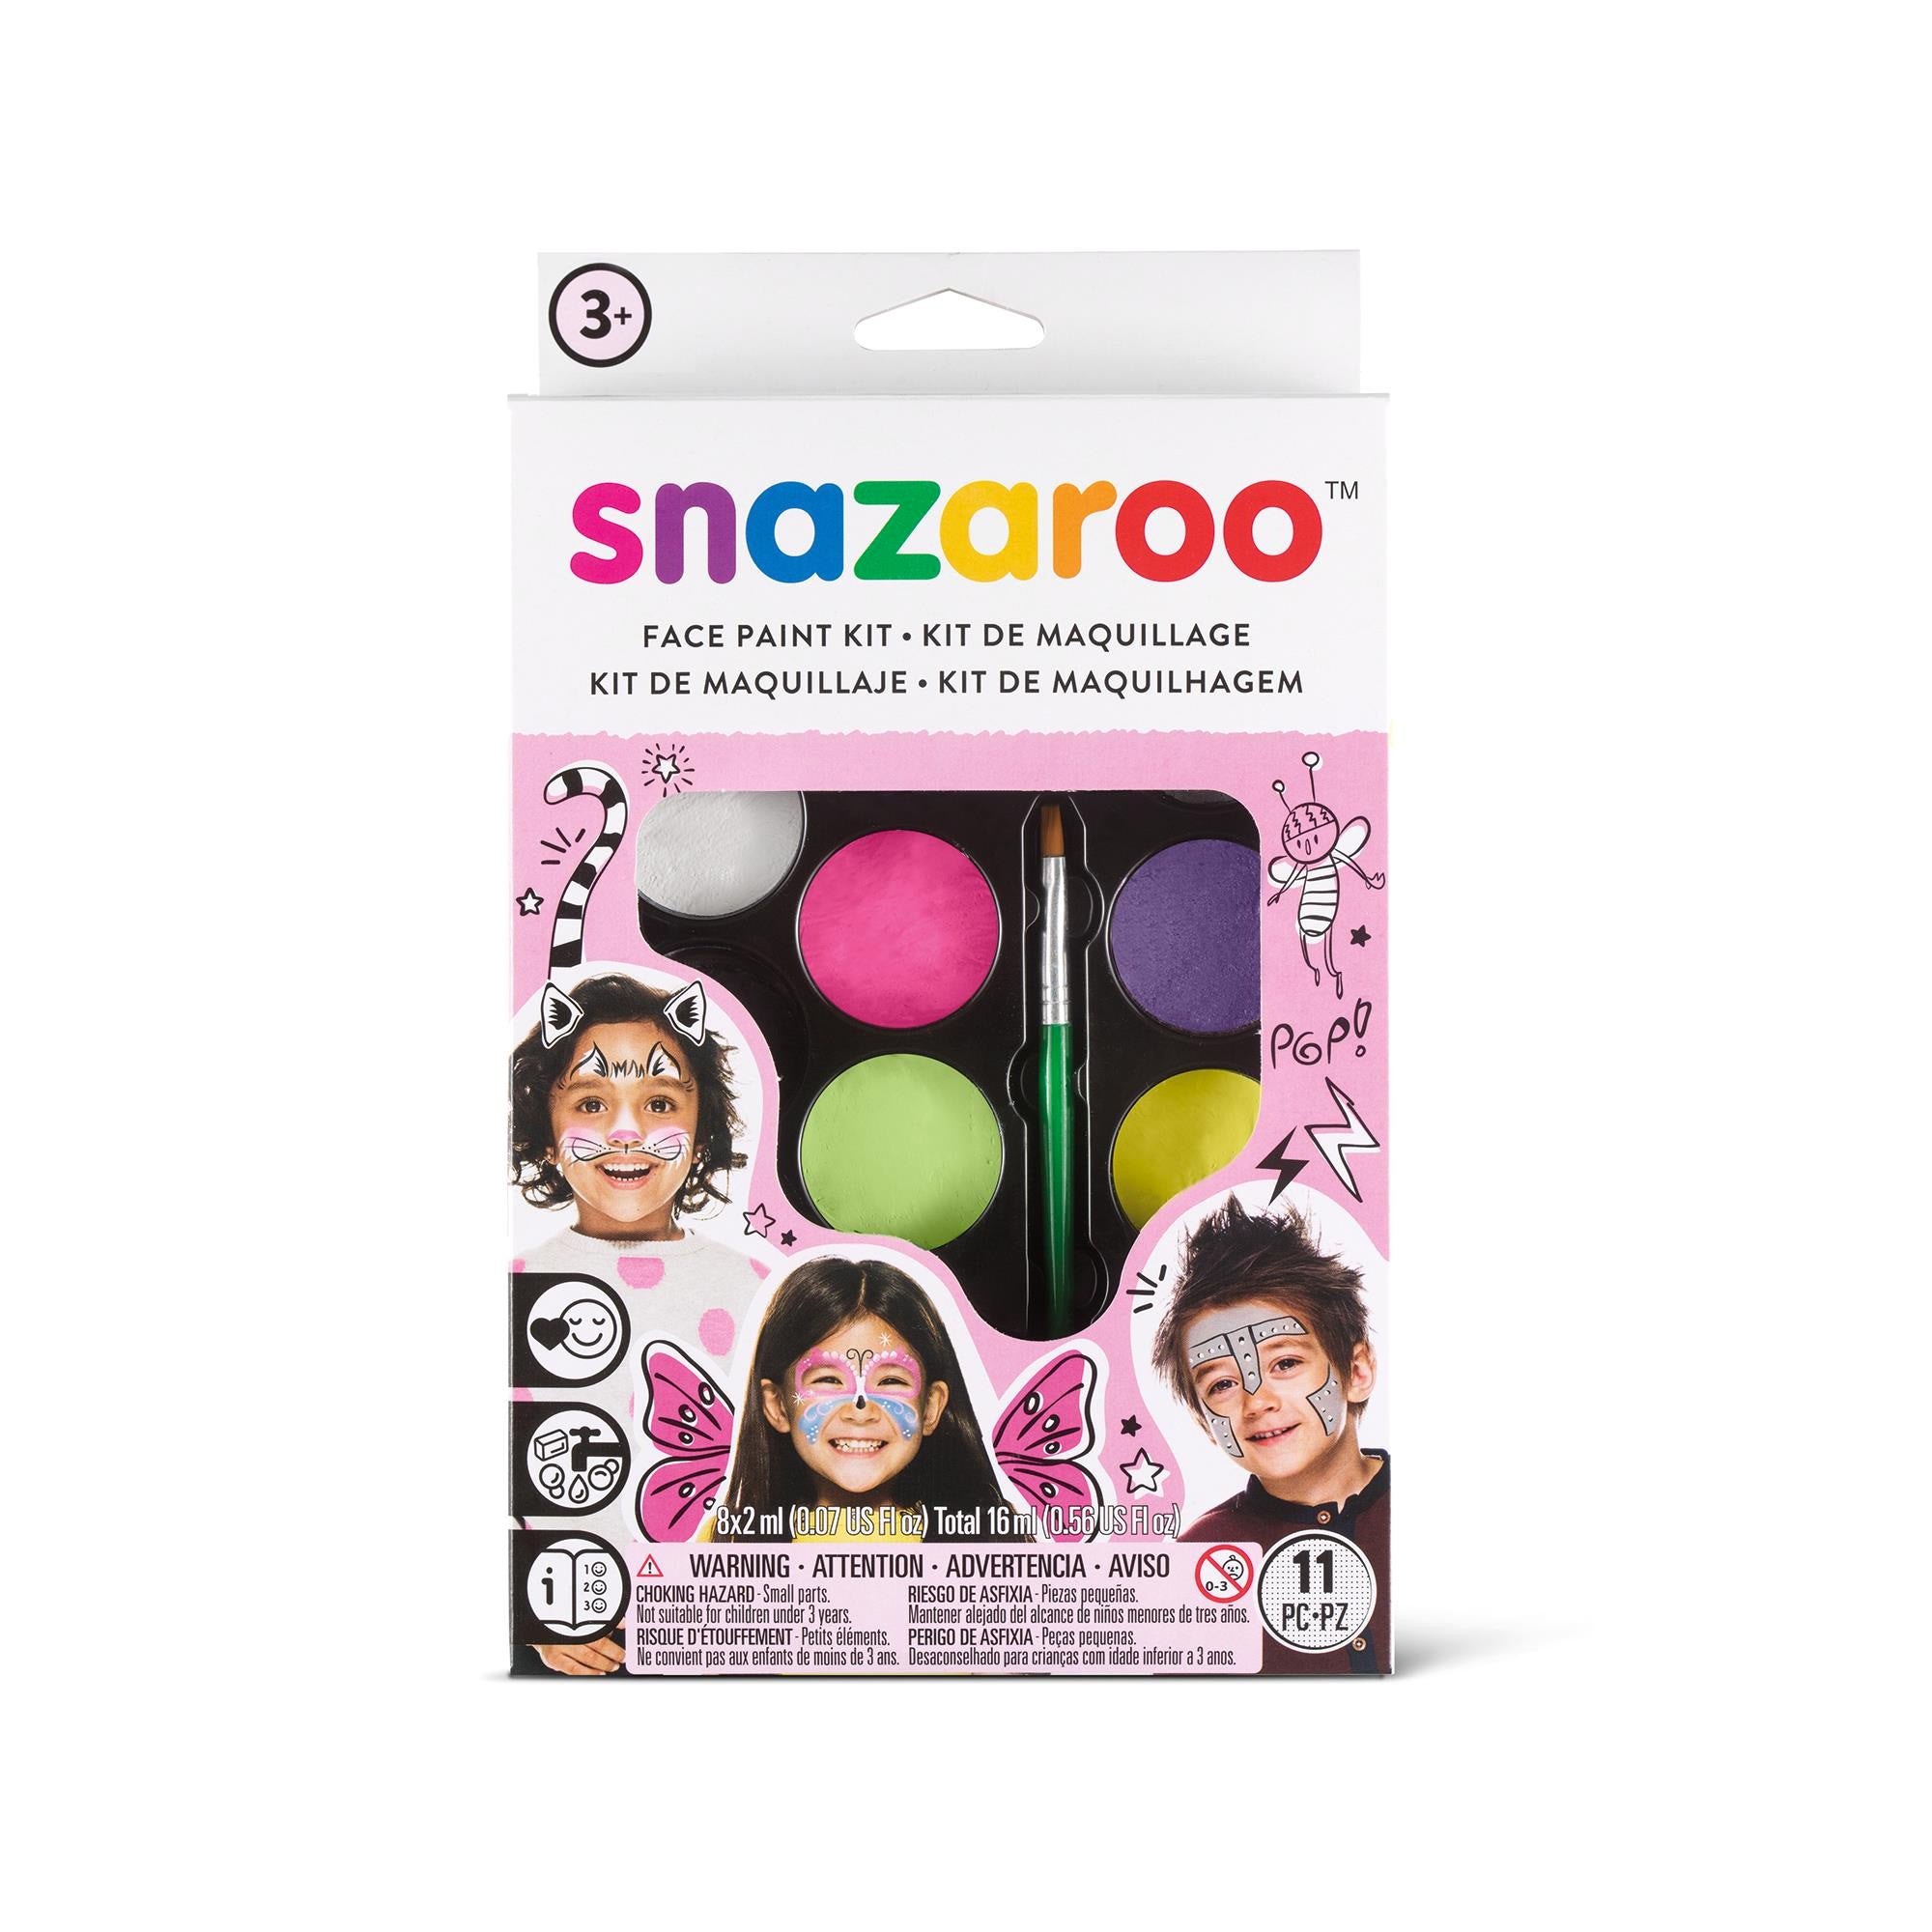 Snazaroo Professional Face Painting Kit - Craft & Hobbies from